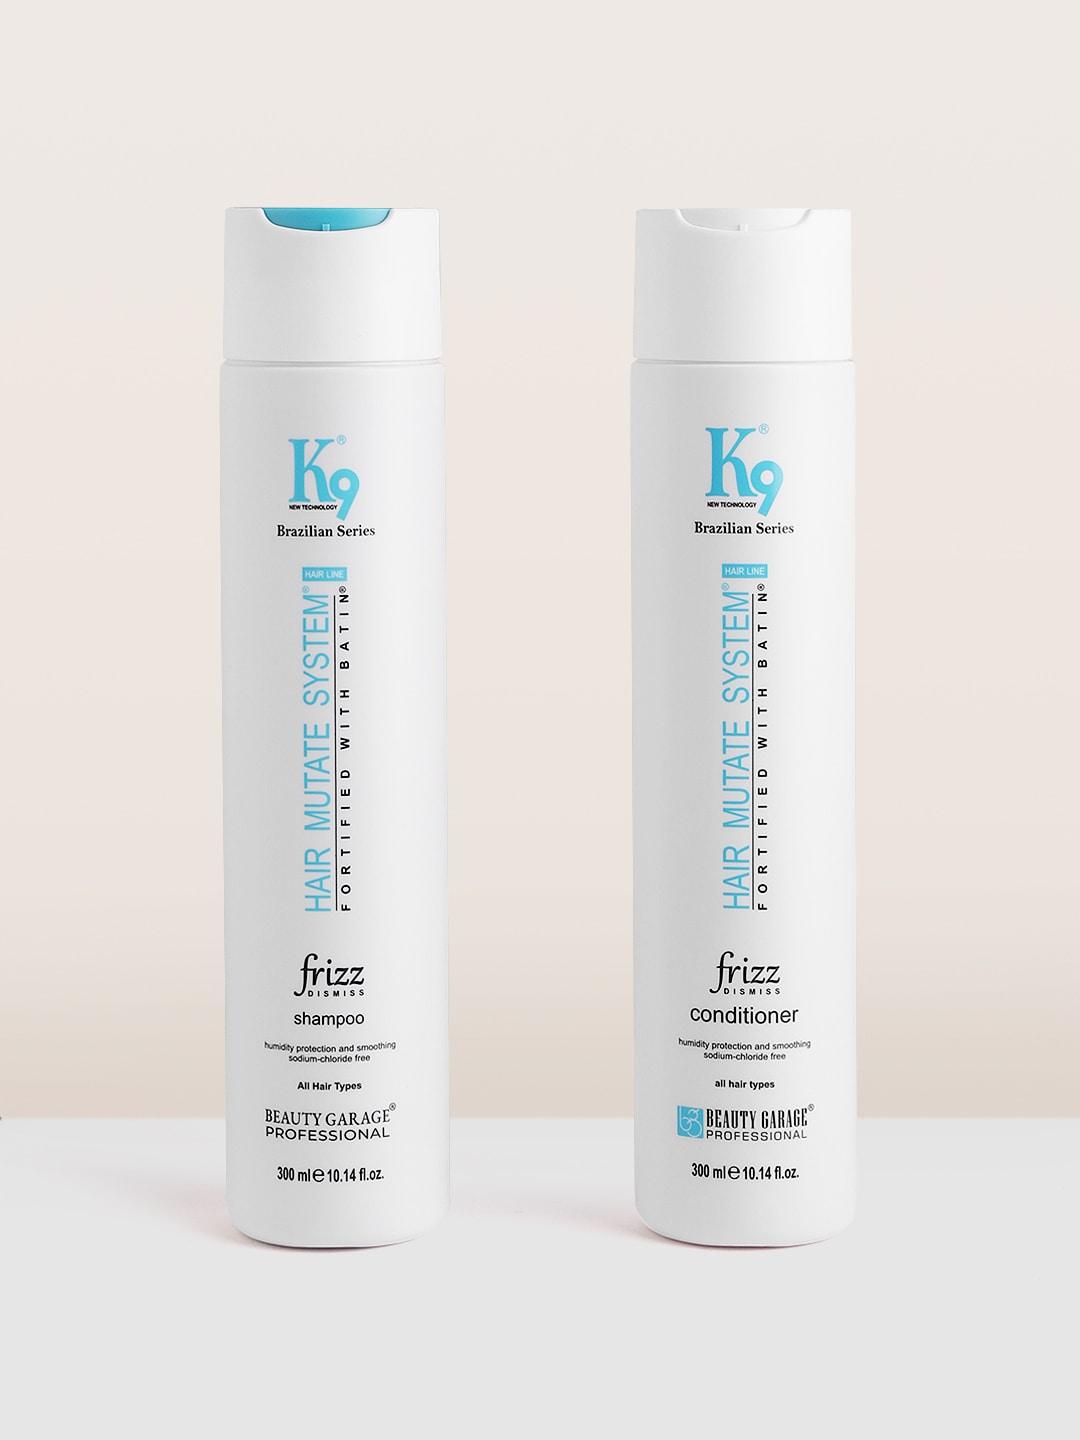 beauty garage set of k9 frizz dismiss shampoo & conditioner for all hair types- 300ml each